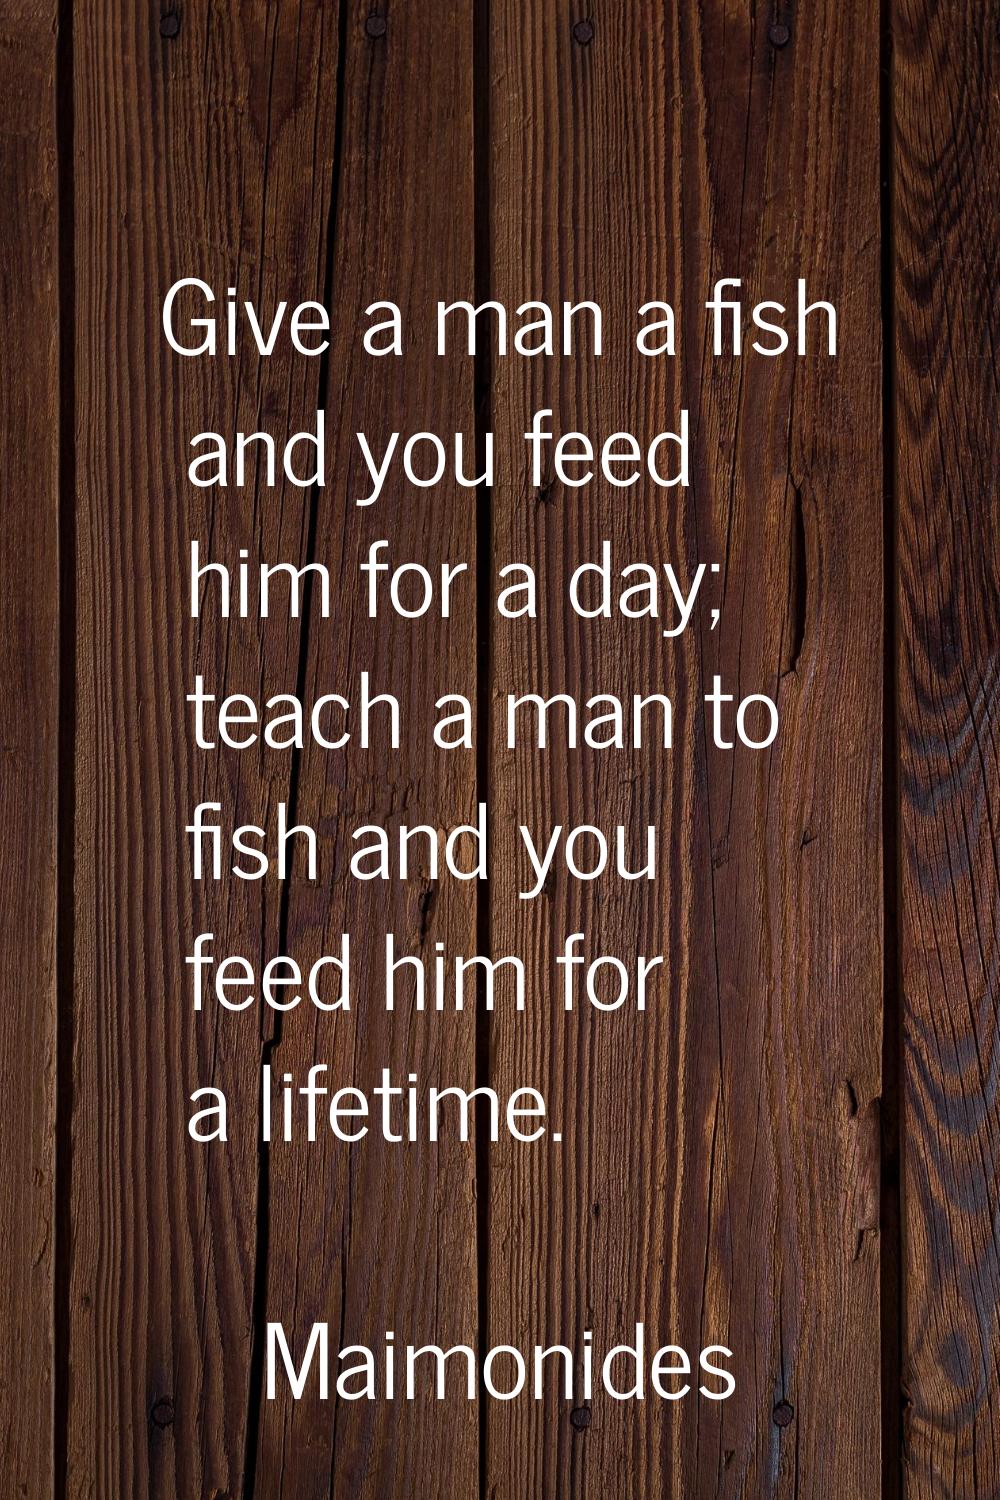 Give a man a fish and you feed him for a day; teach a man to fish and you feed him for a lifetime.